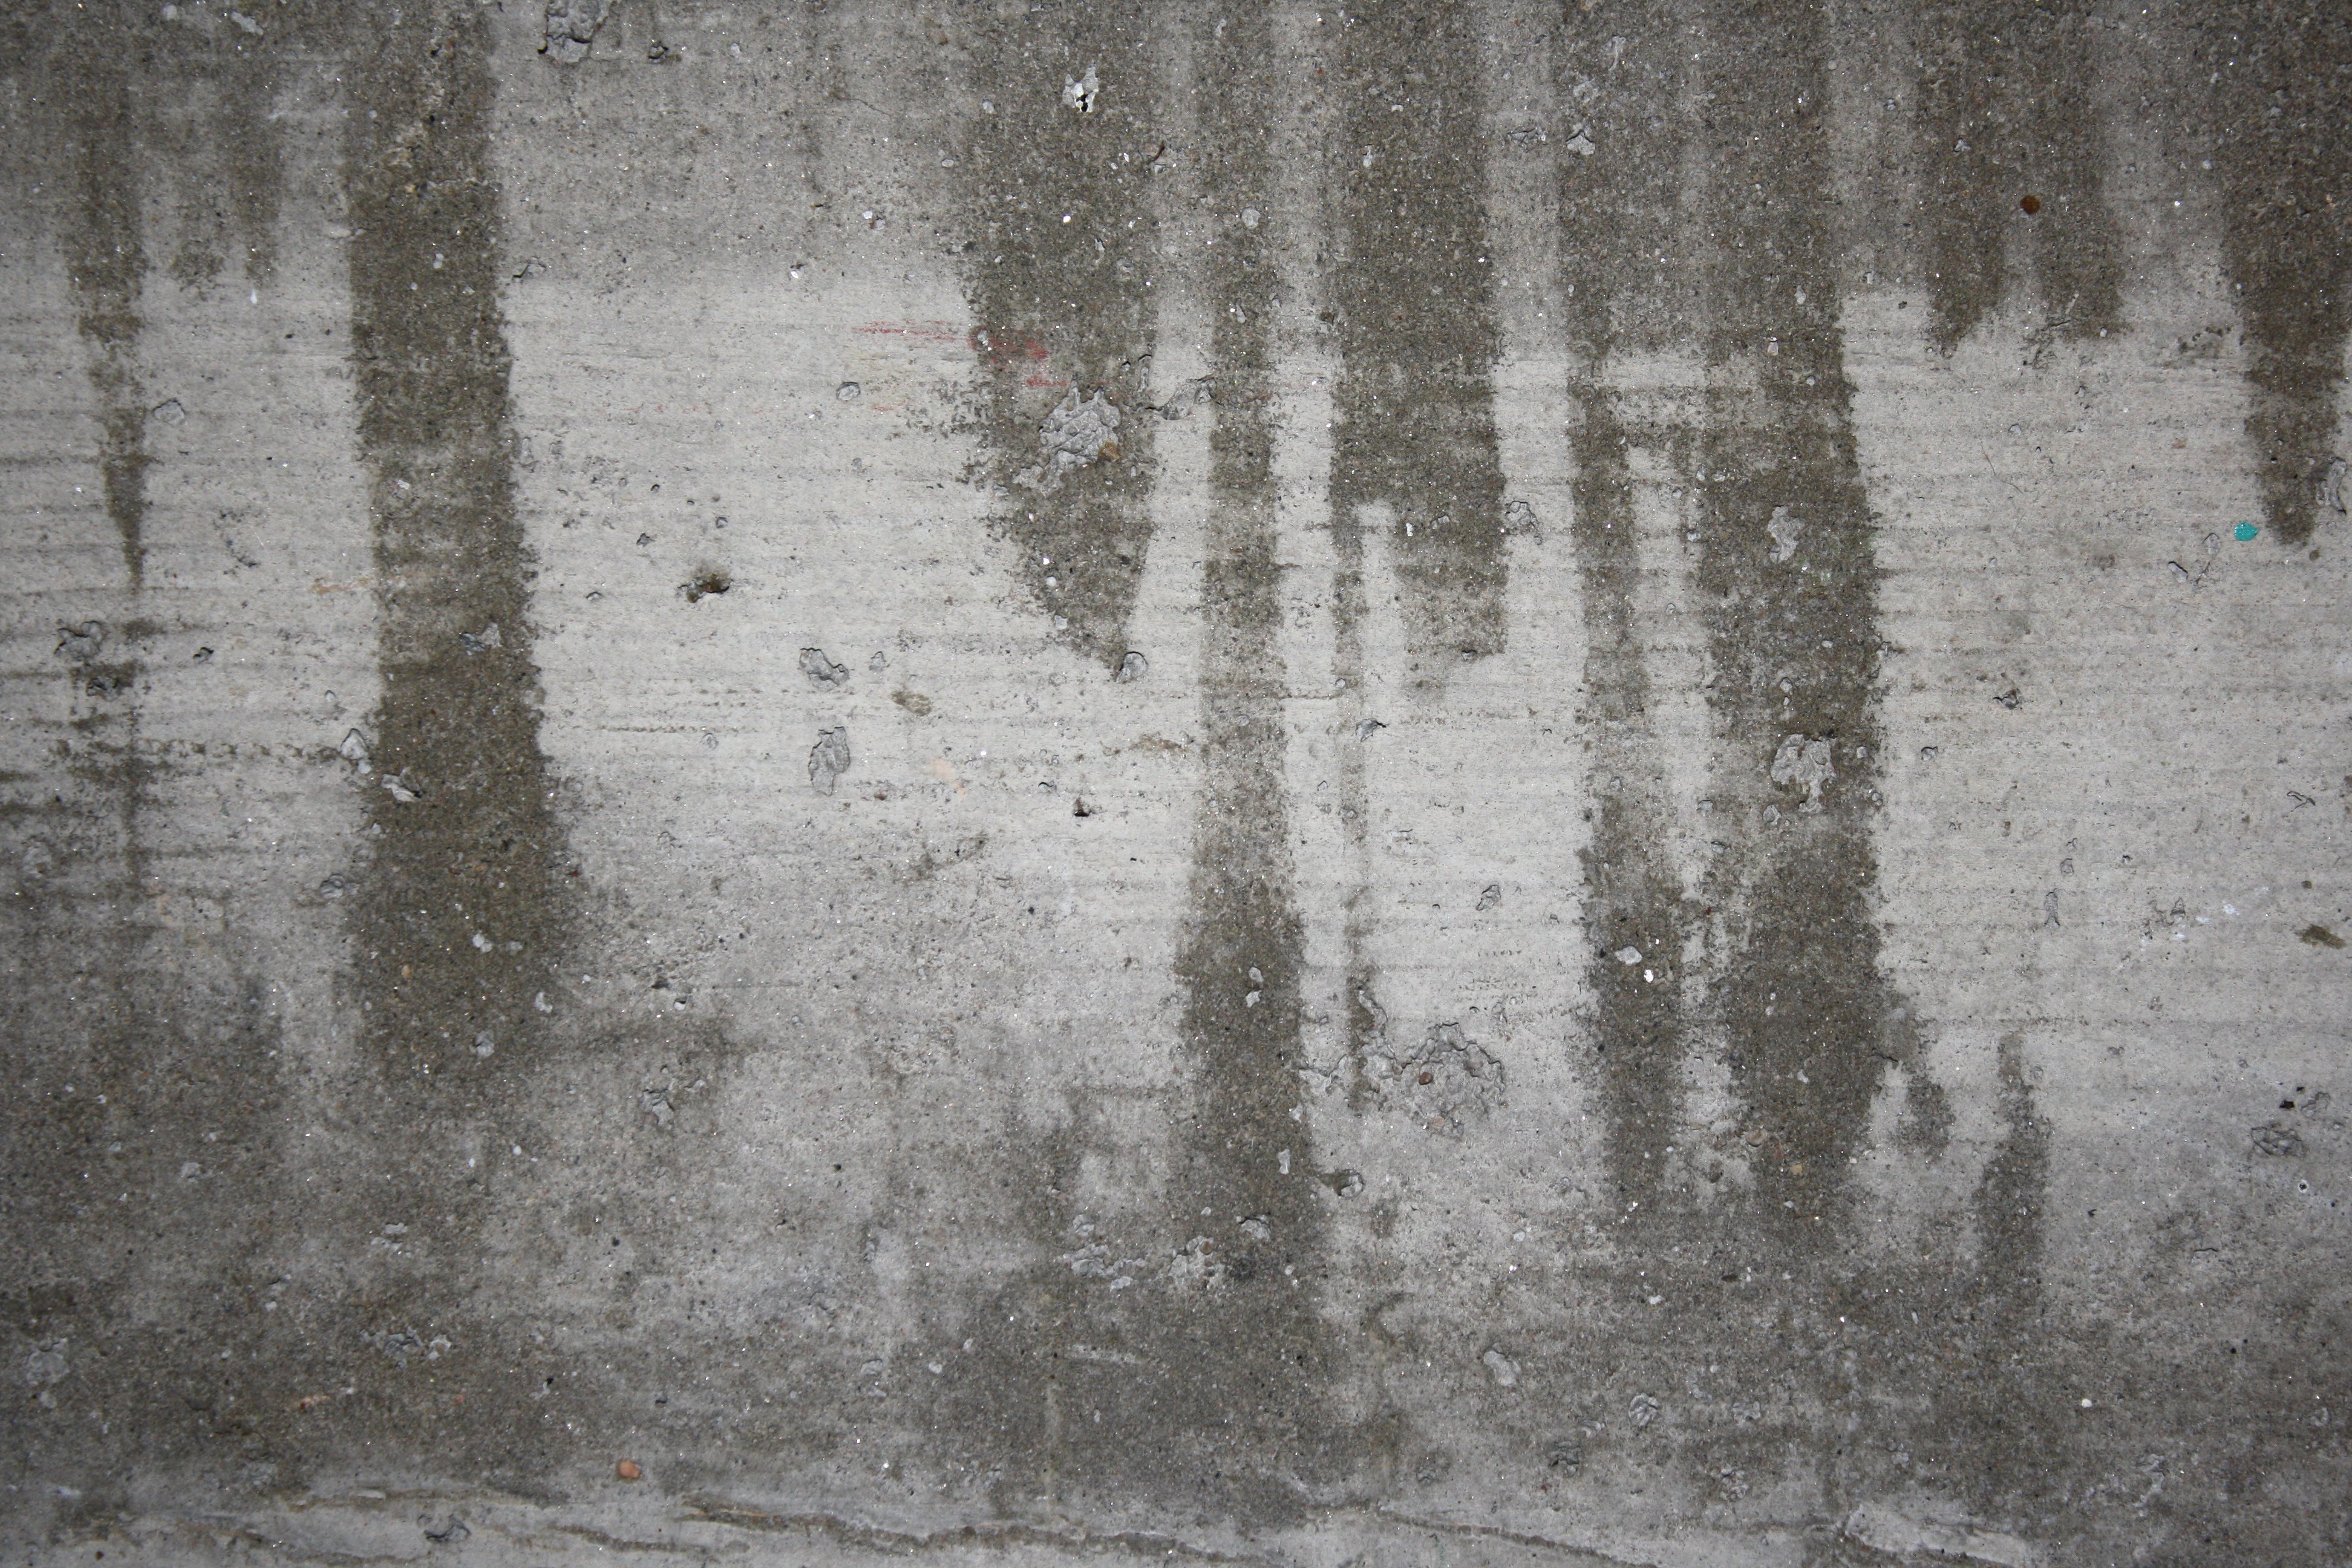 Grunge Wall Texture Picture | Free Photograph | Photos Public Domain